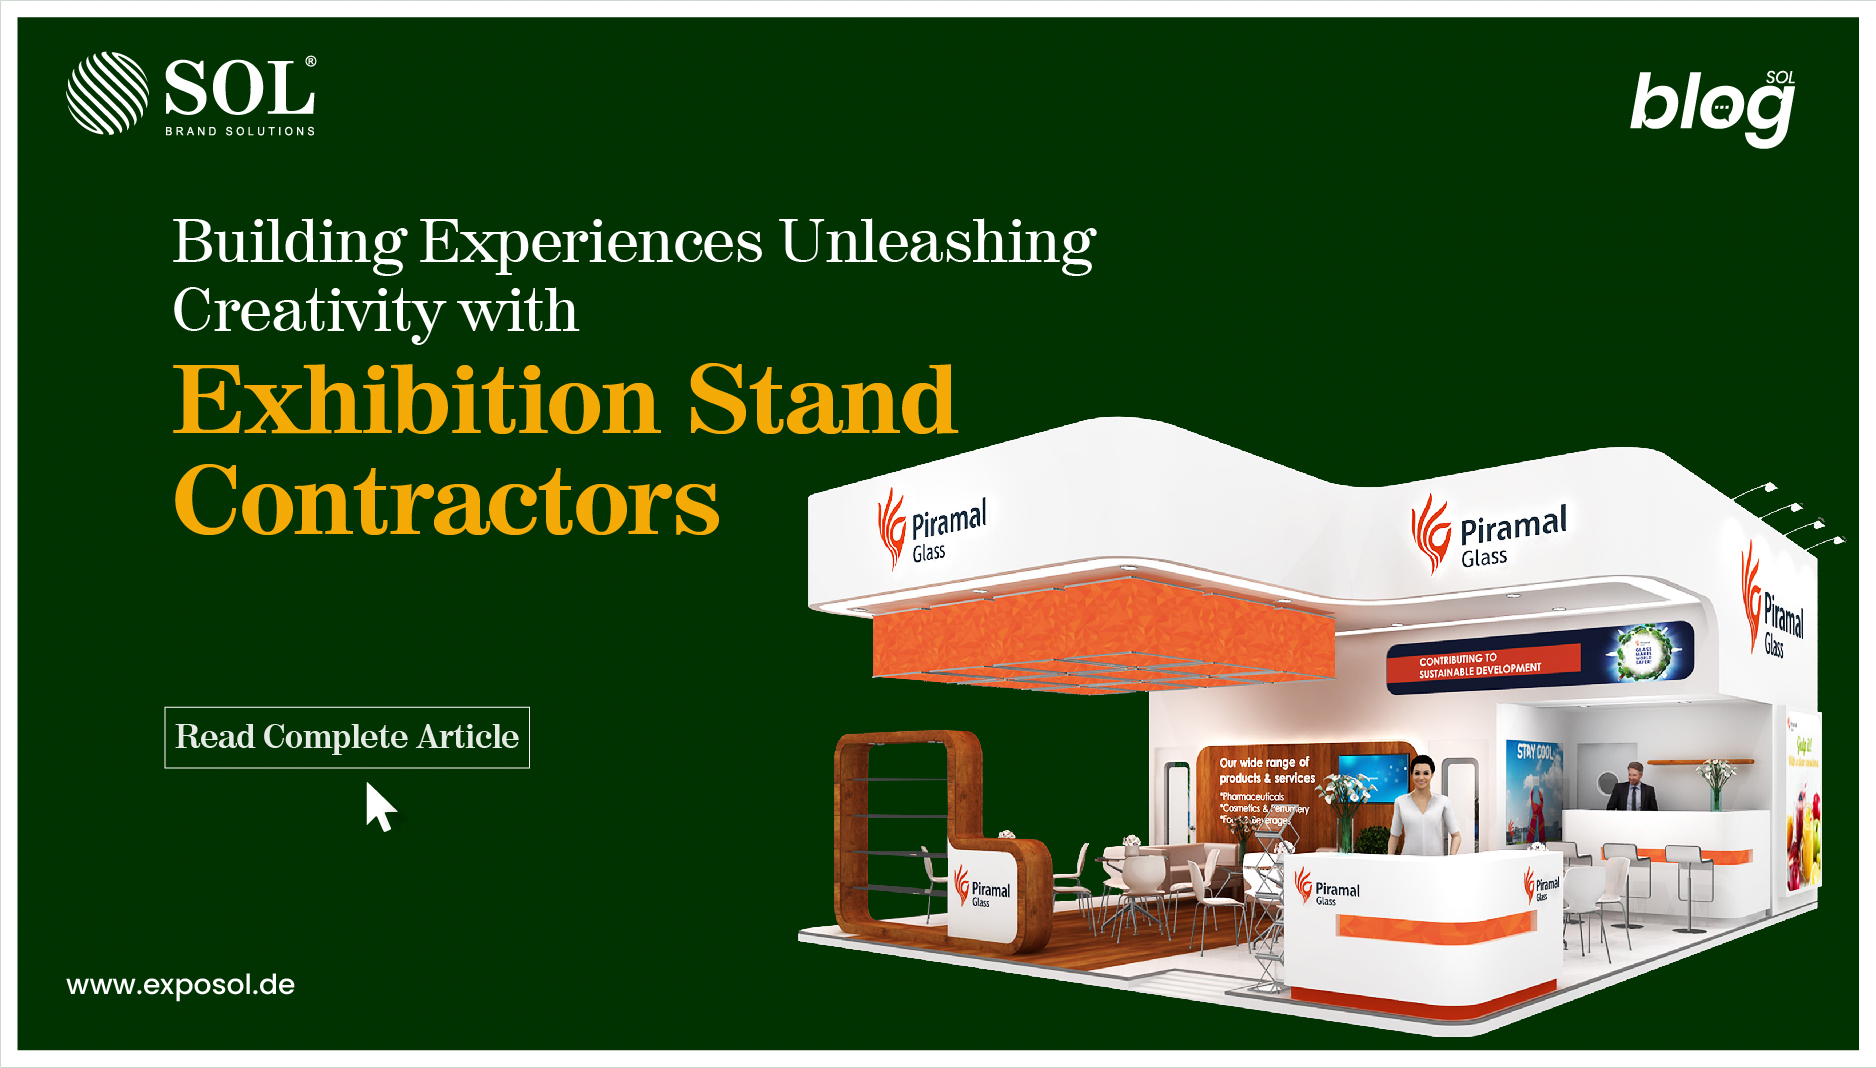 Building Experiences: Unleashing Creativity with Exhibition Stand Contractors